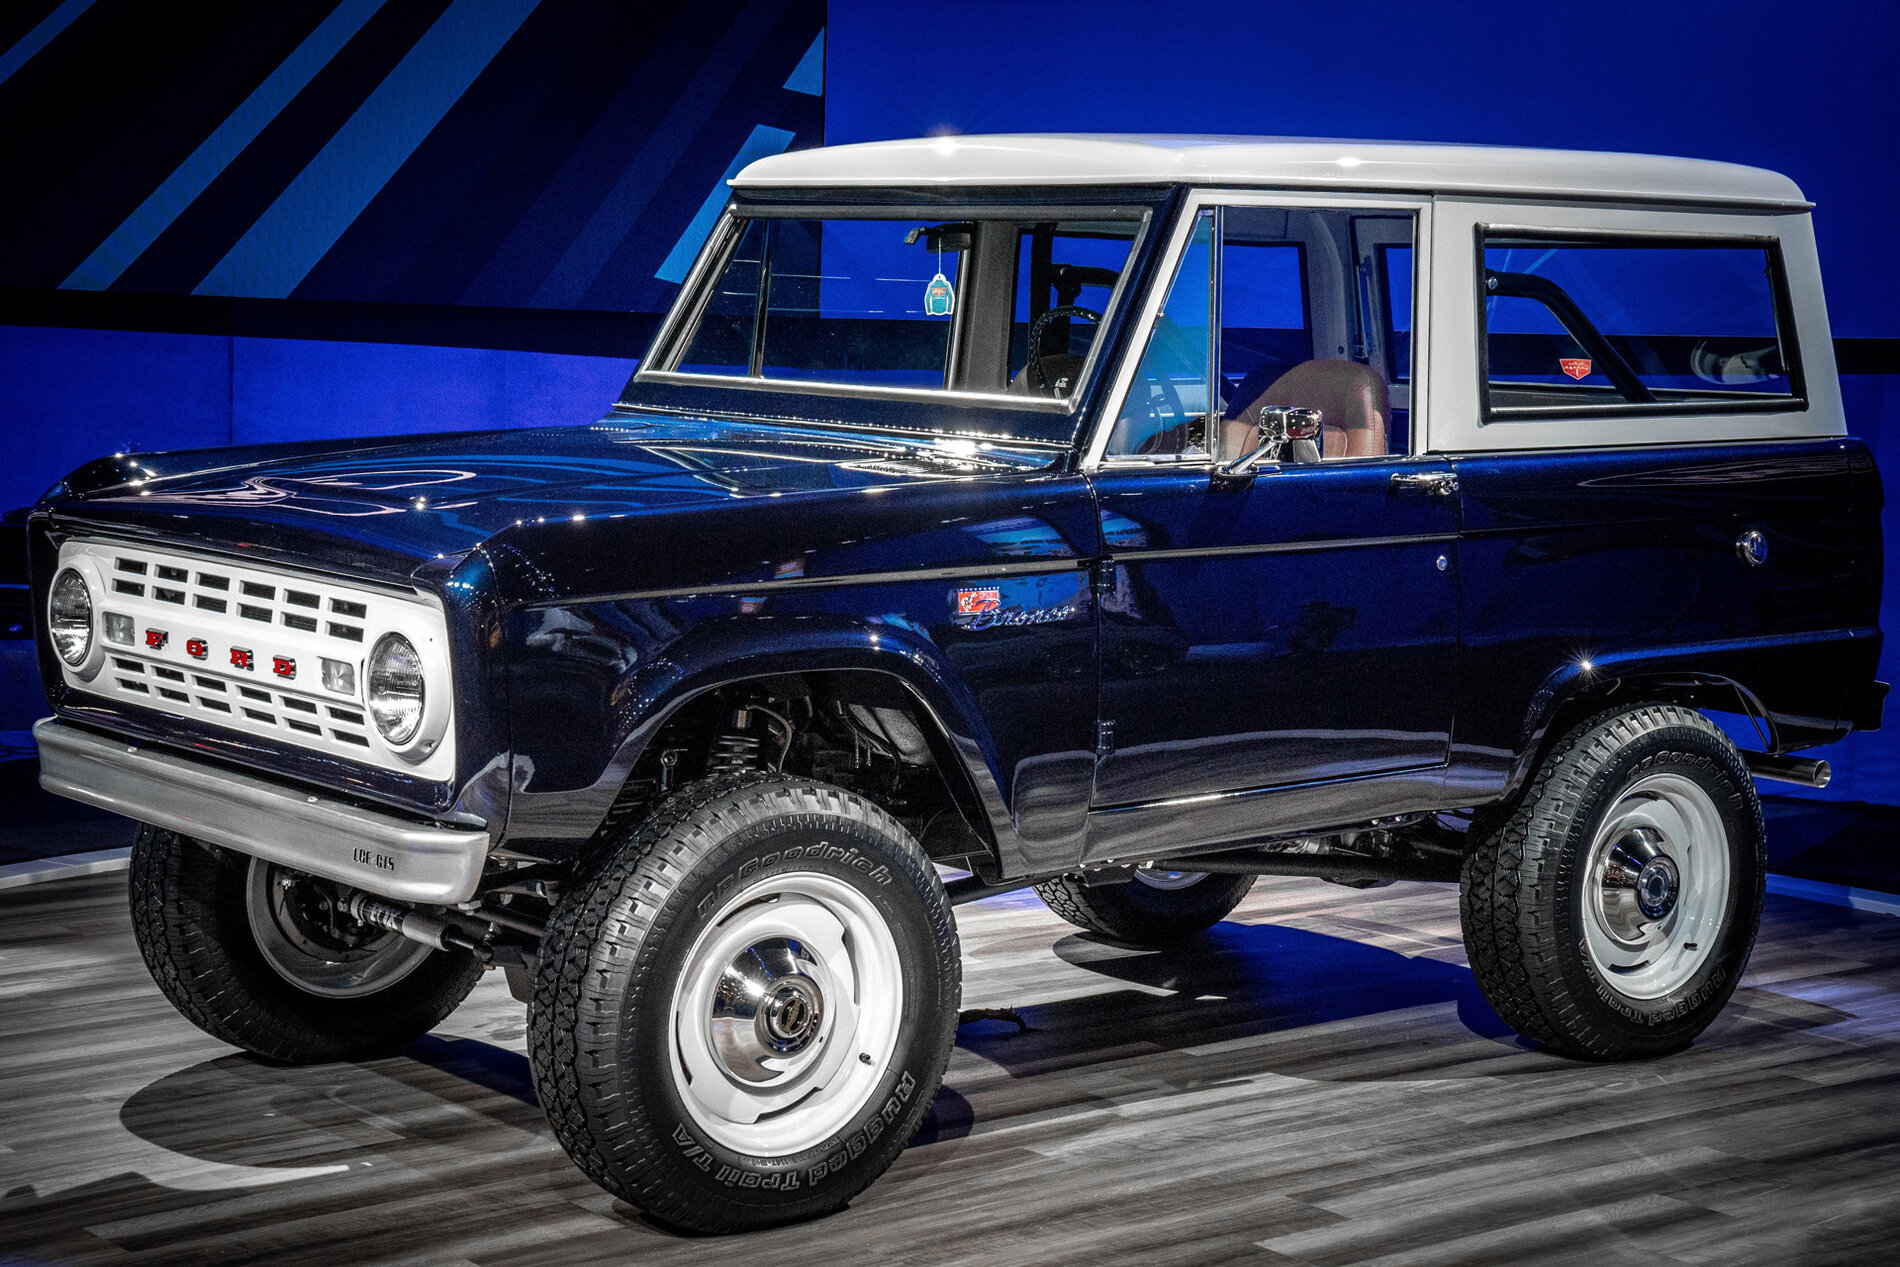 jay-lenos-1968-ford-bronco-restored-by-lge-cts-motorsports_100723077_h.jpg